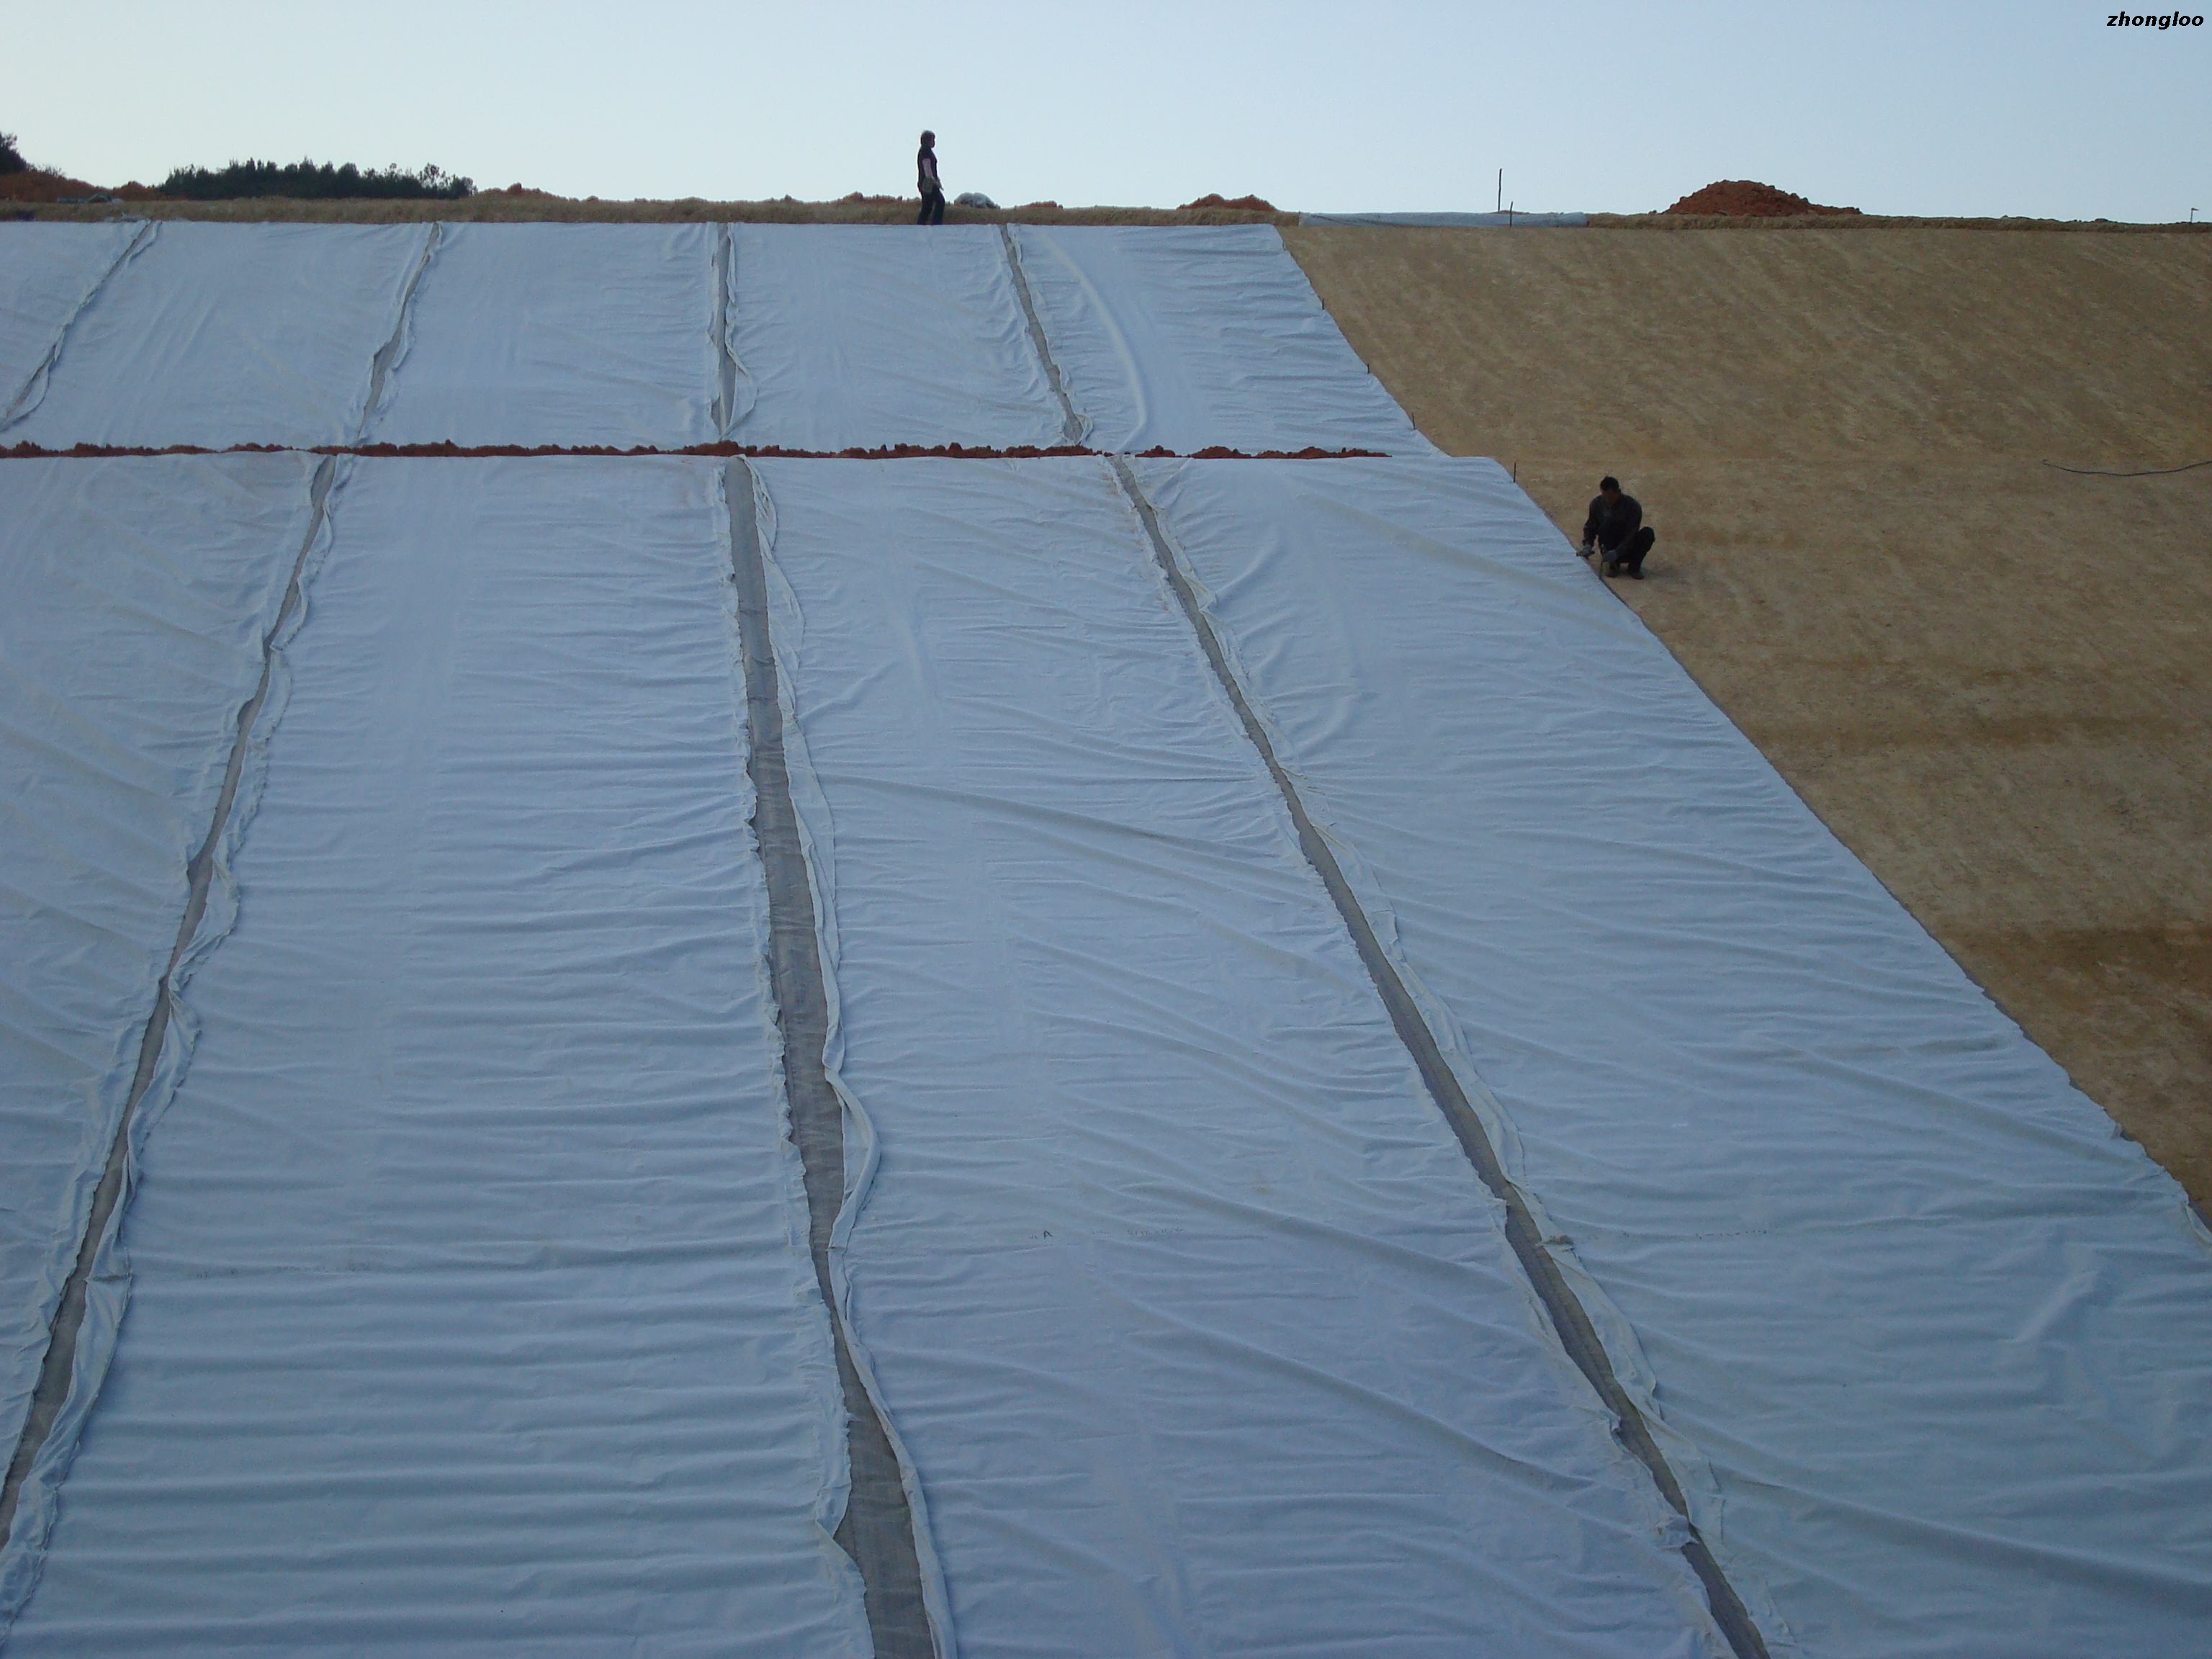 800g/m2 Waterproofing Sheet Material of Composite Geomembrane